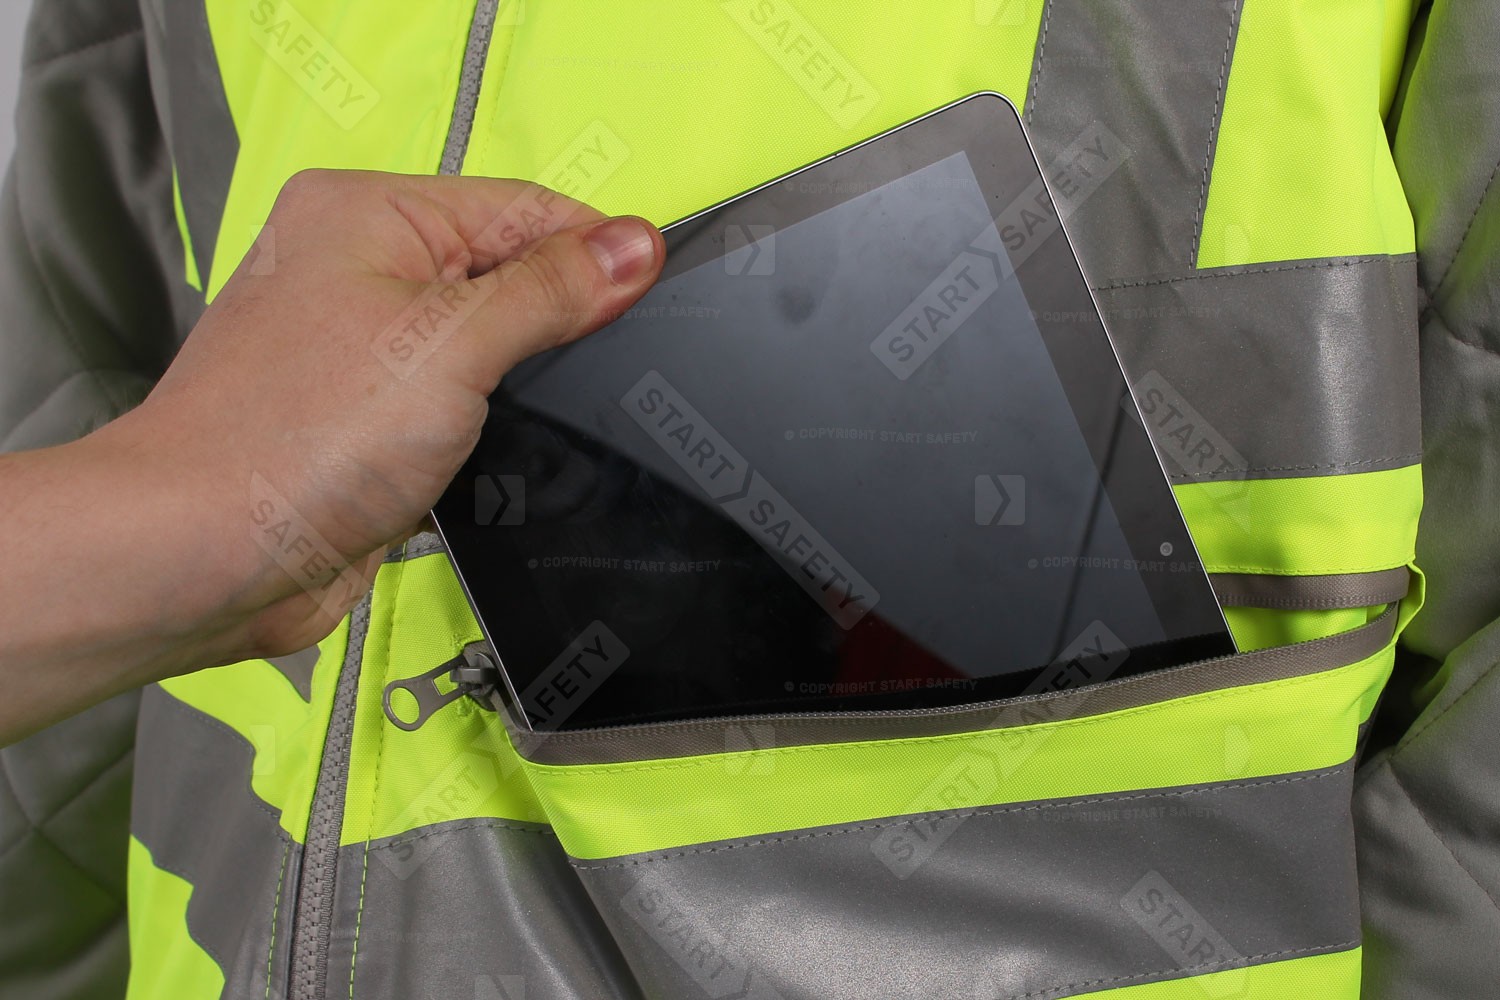 Large Front Pocket On A Body Warmer That Can Fit A Tablet